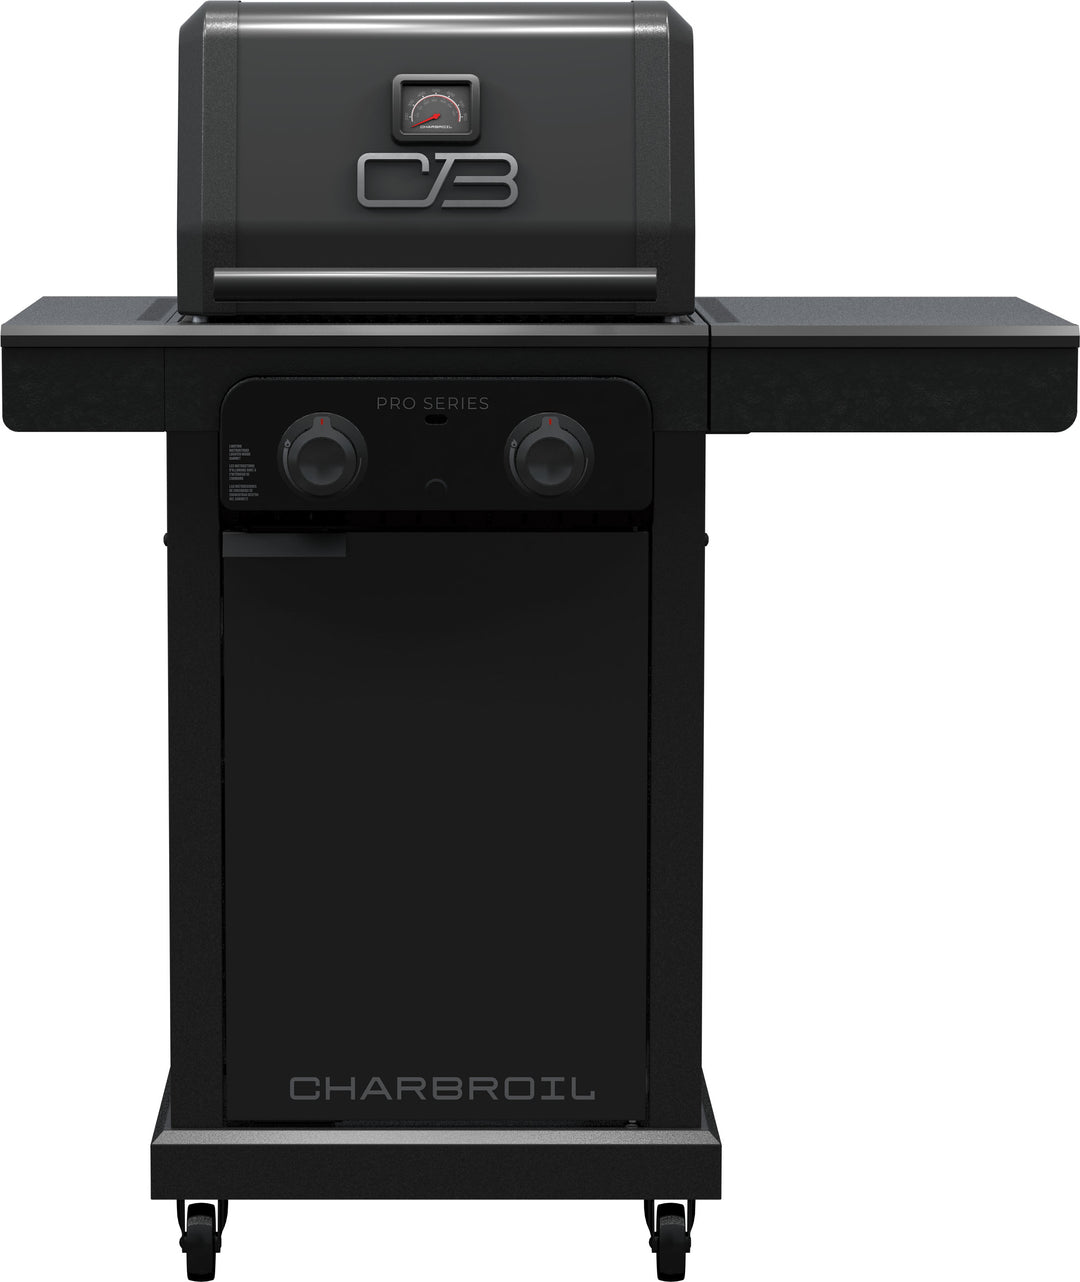 Char-Broil - Pro Series with Amplifire™ Infrared Technology 2-Burner Propane Gas Grill Cabinet, 463676724 - Black_0